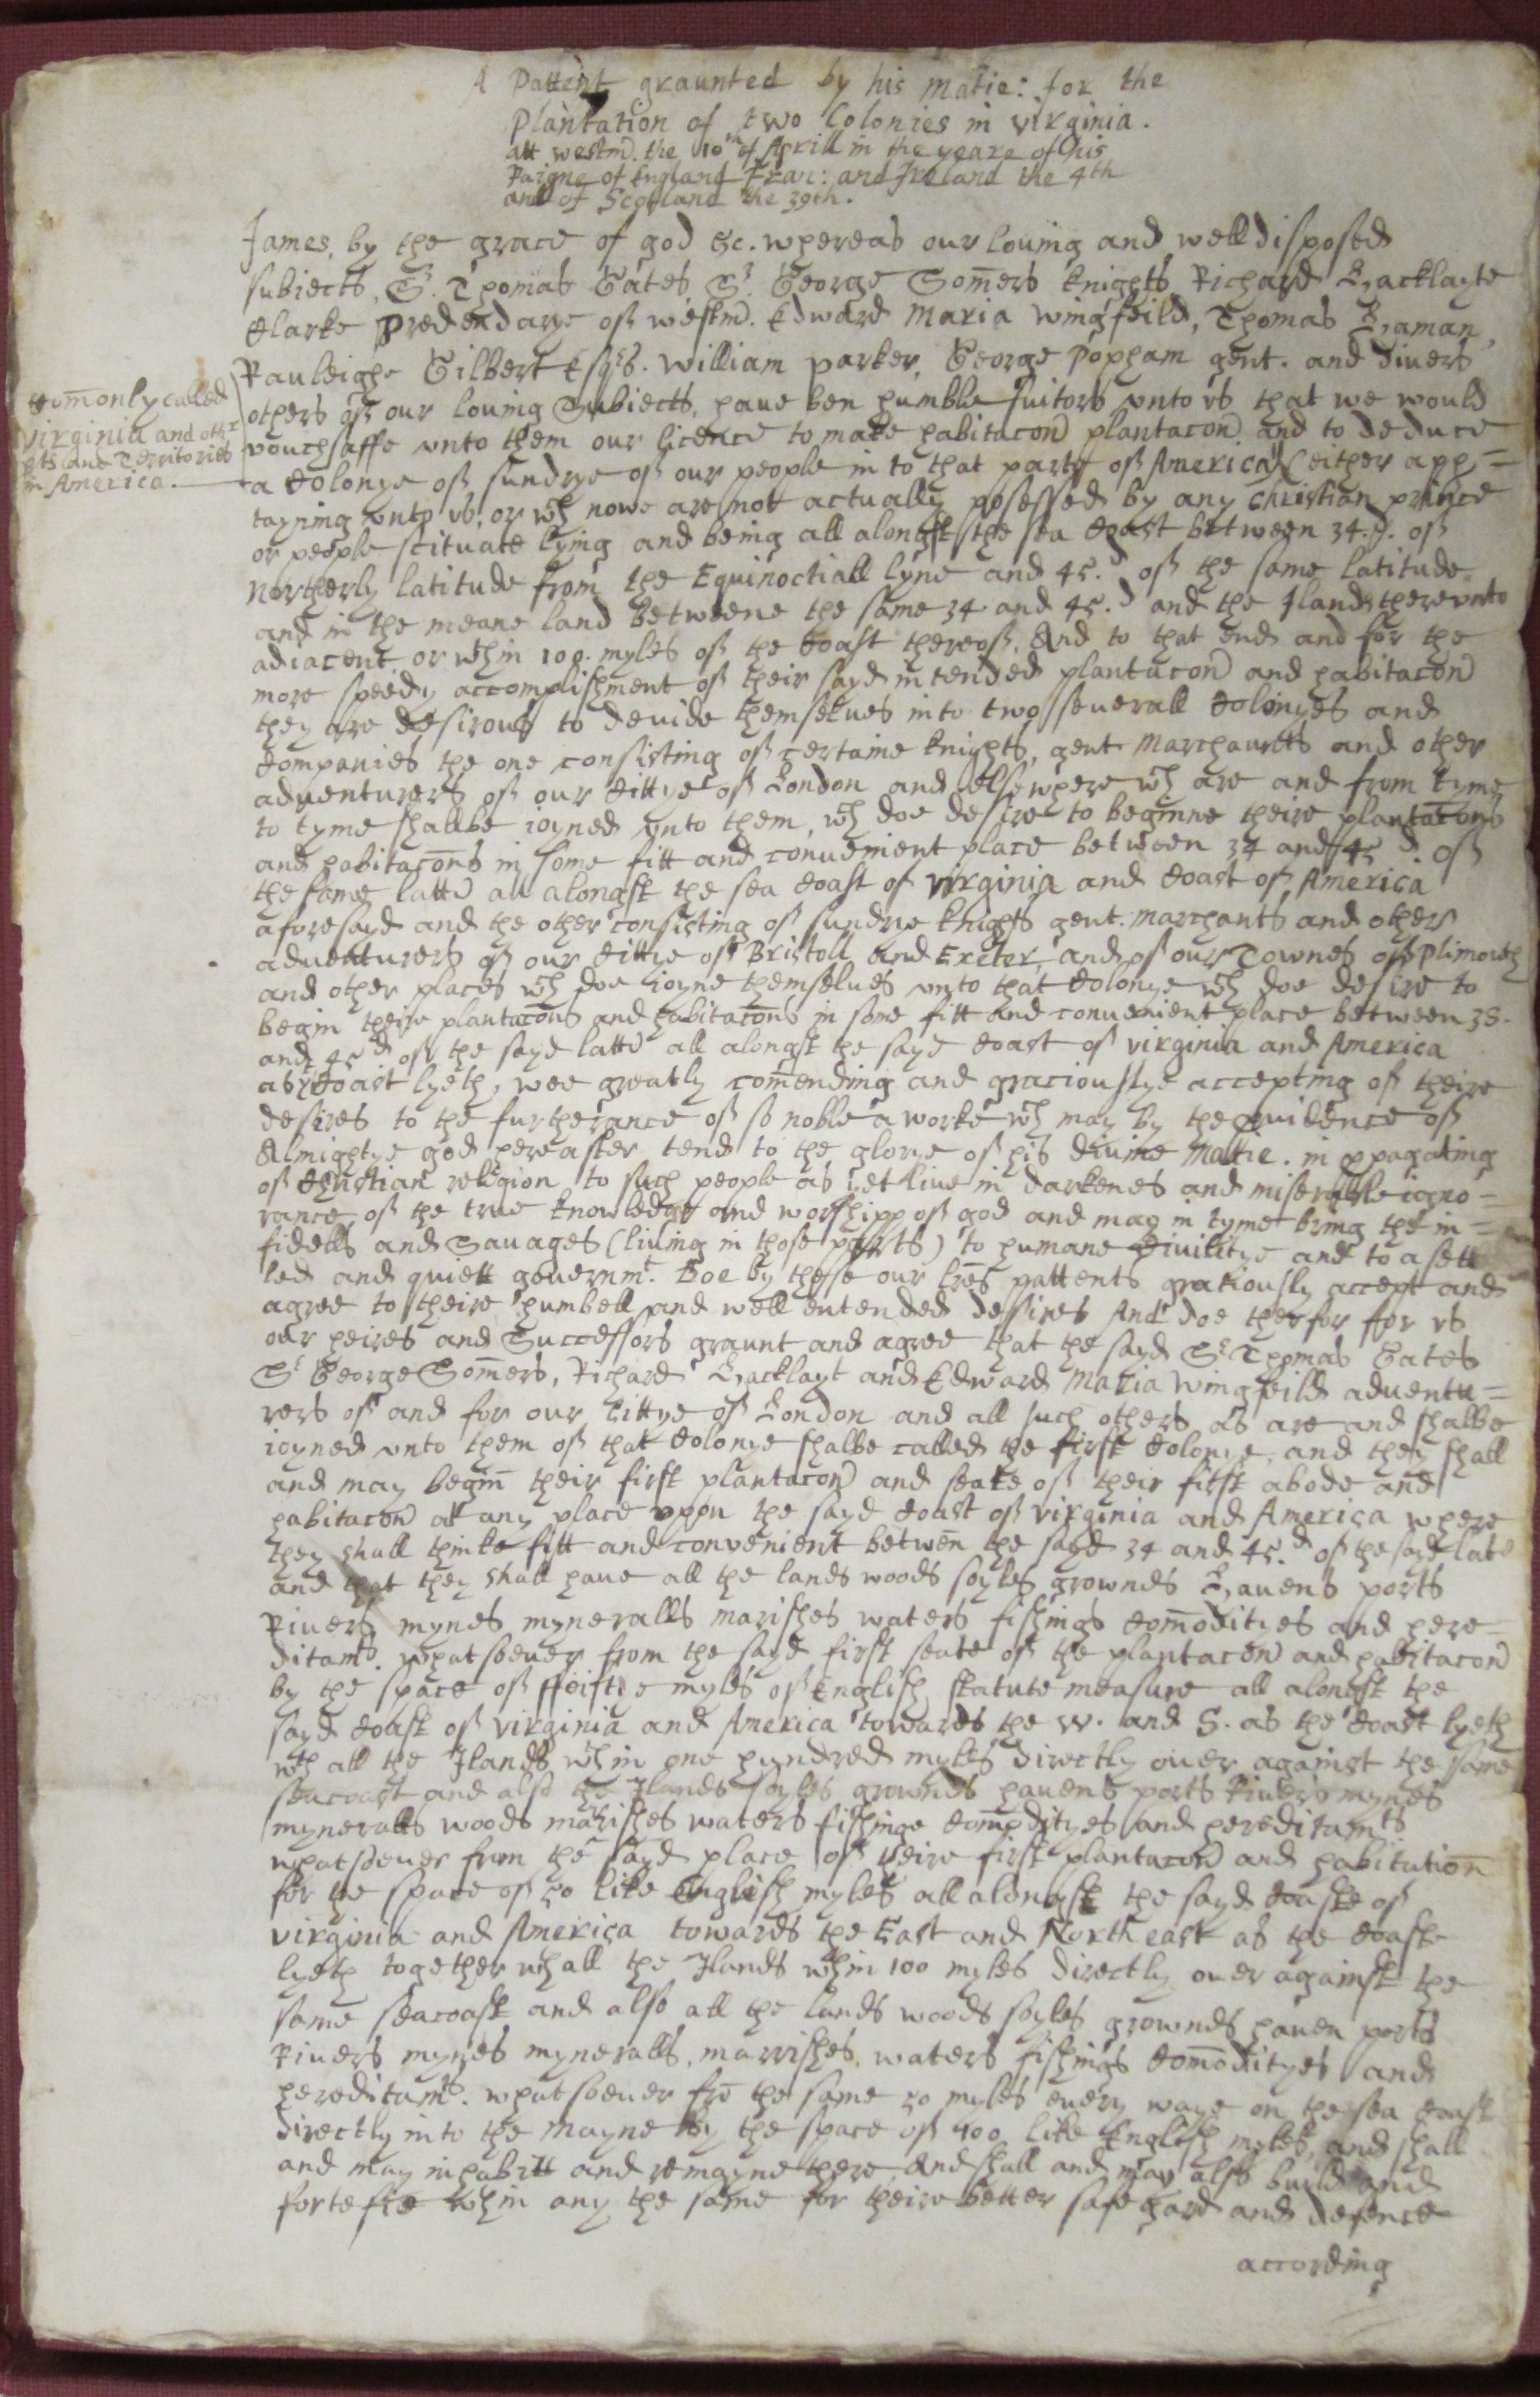 “A Pattent Graunted by His Majesty (James I, King of England) for the Plantation of Two Colonies in Virginia.” 10 April 1606. (MSS 11625. Paul Mellon Bequest. Photograph by Petrina Jackson)